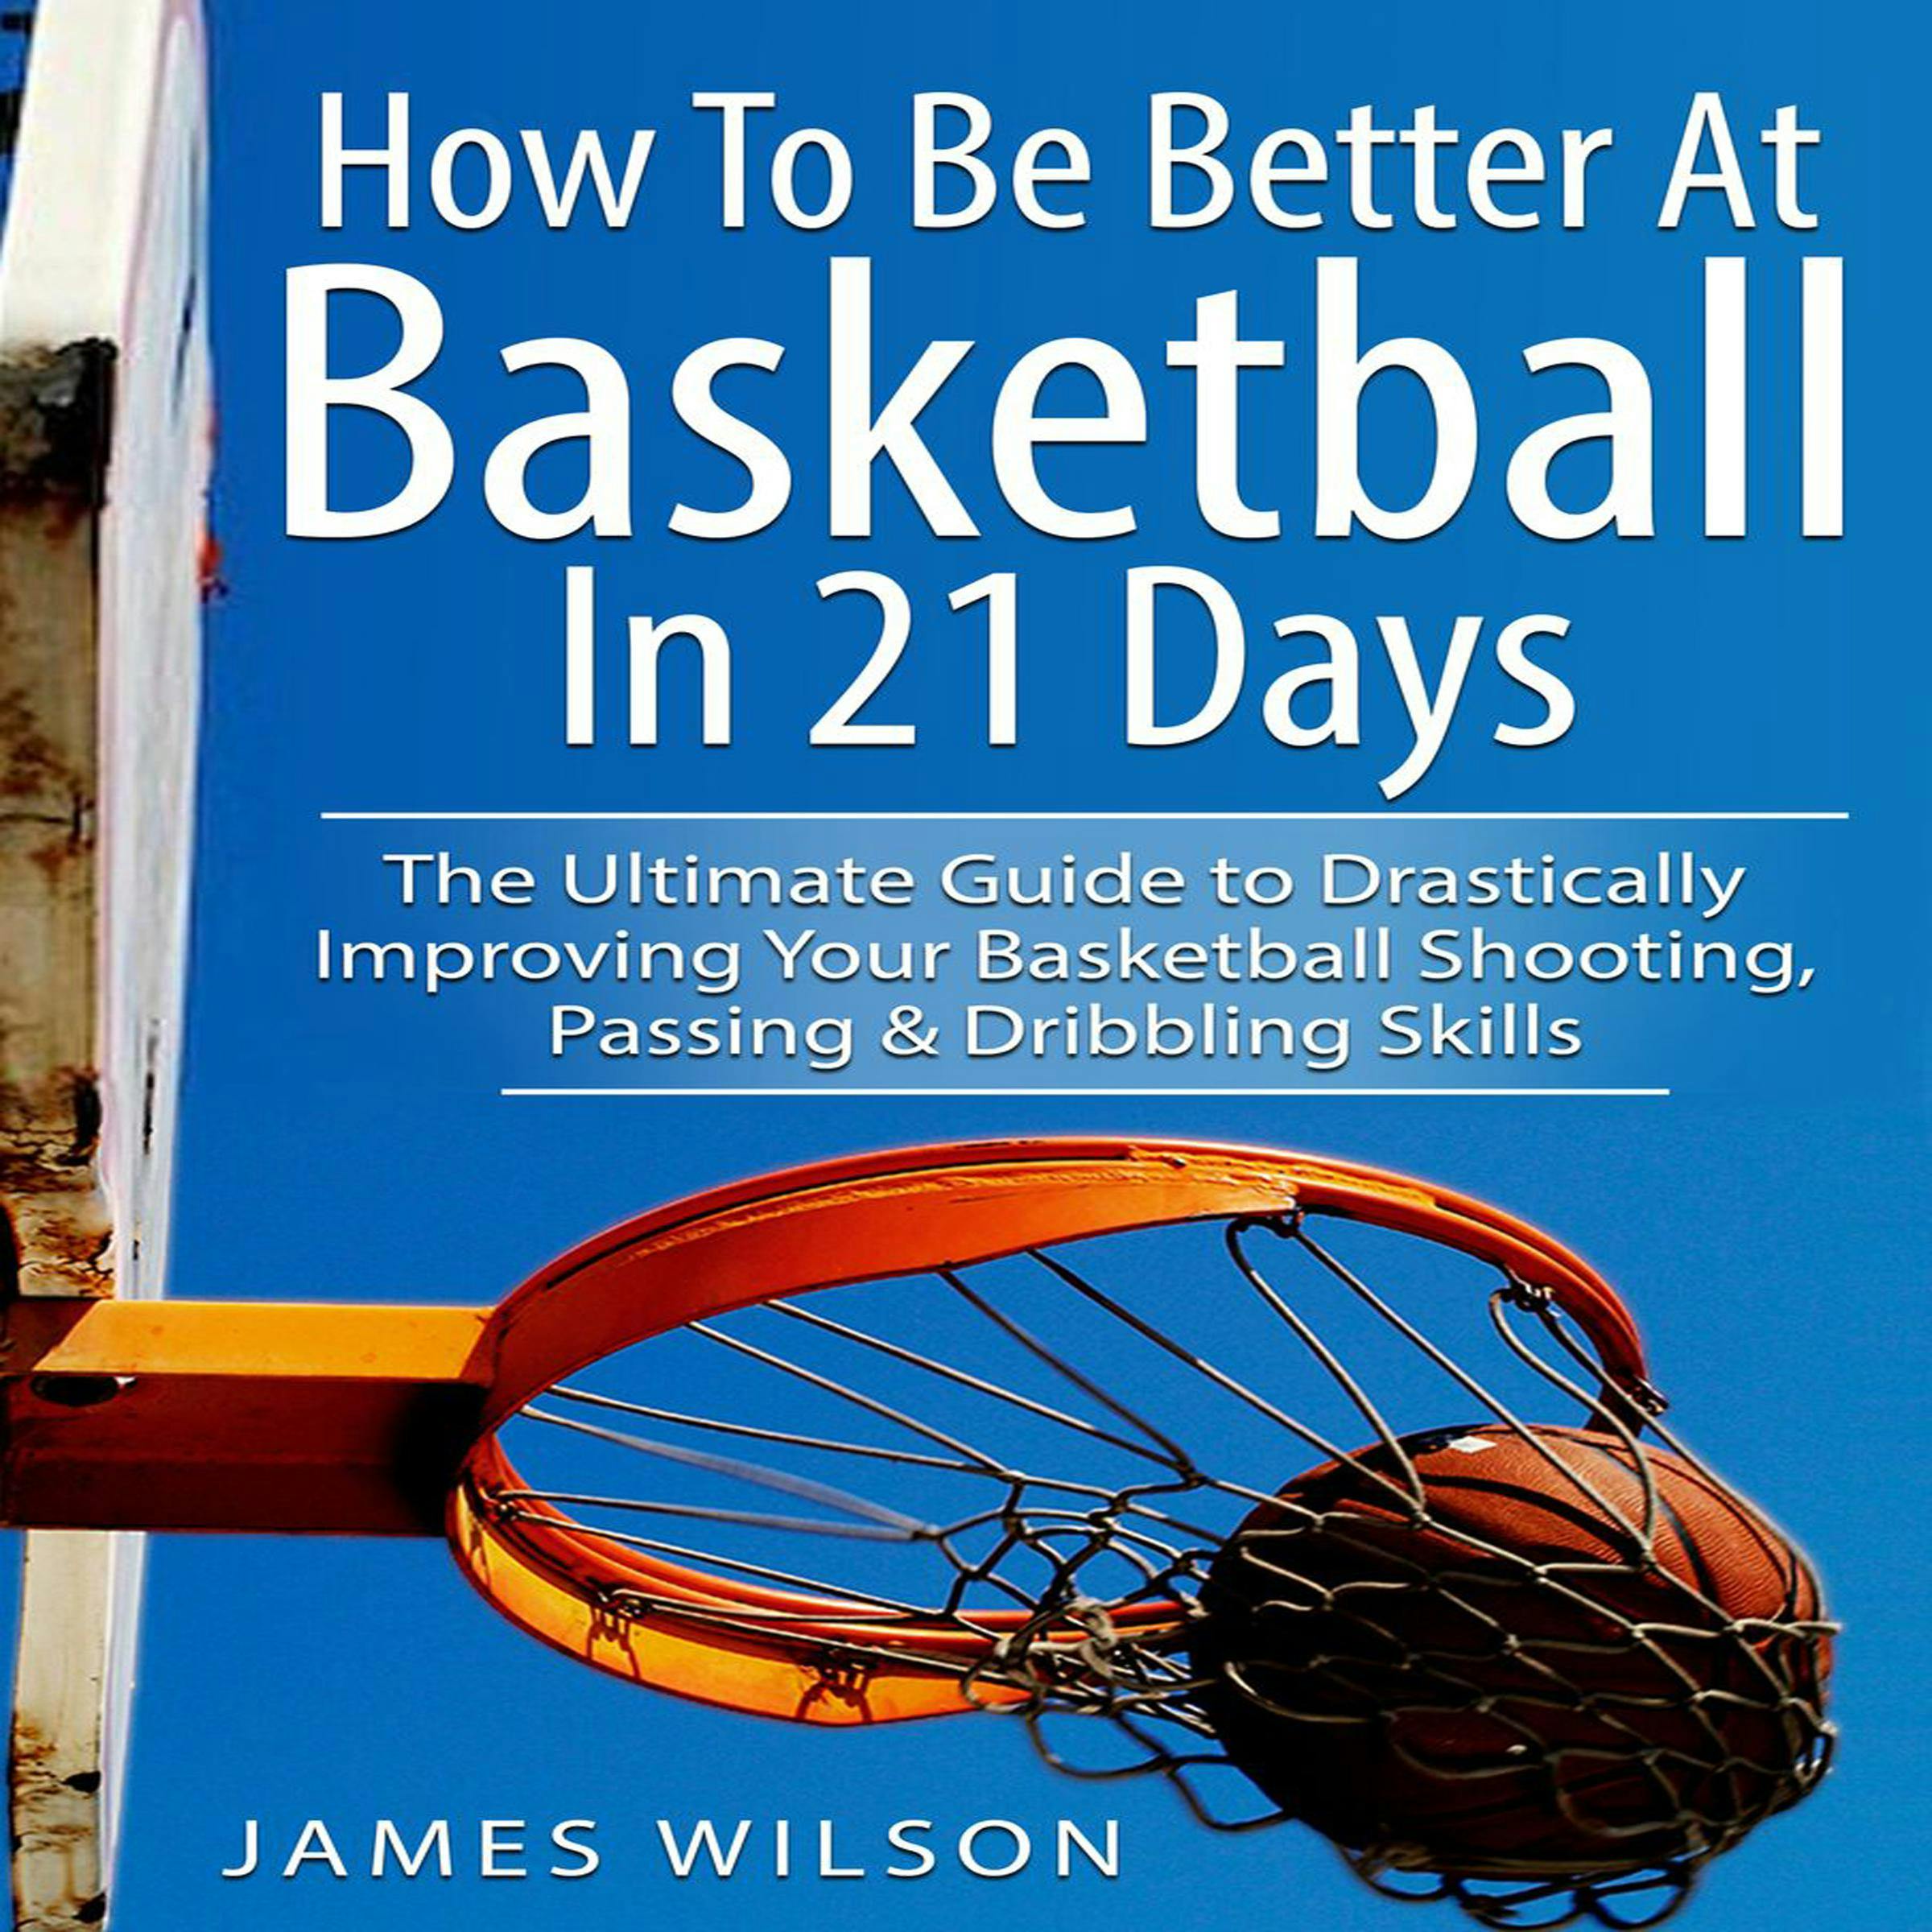 How to Be Better at Basketball in 21 Days: The Ultimate Guide to Drastically Improving Your Basketball Shooting, Passing and Dribbling Skills - James Wilson